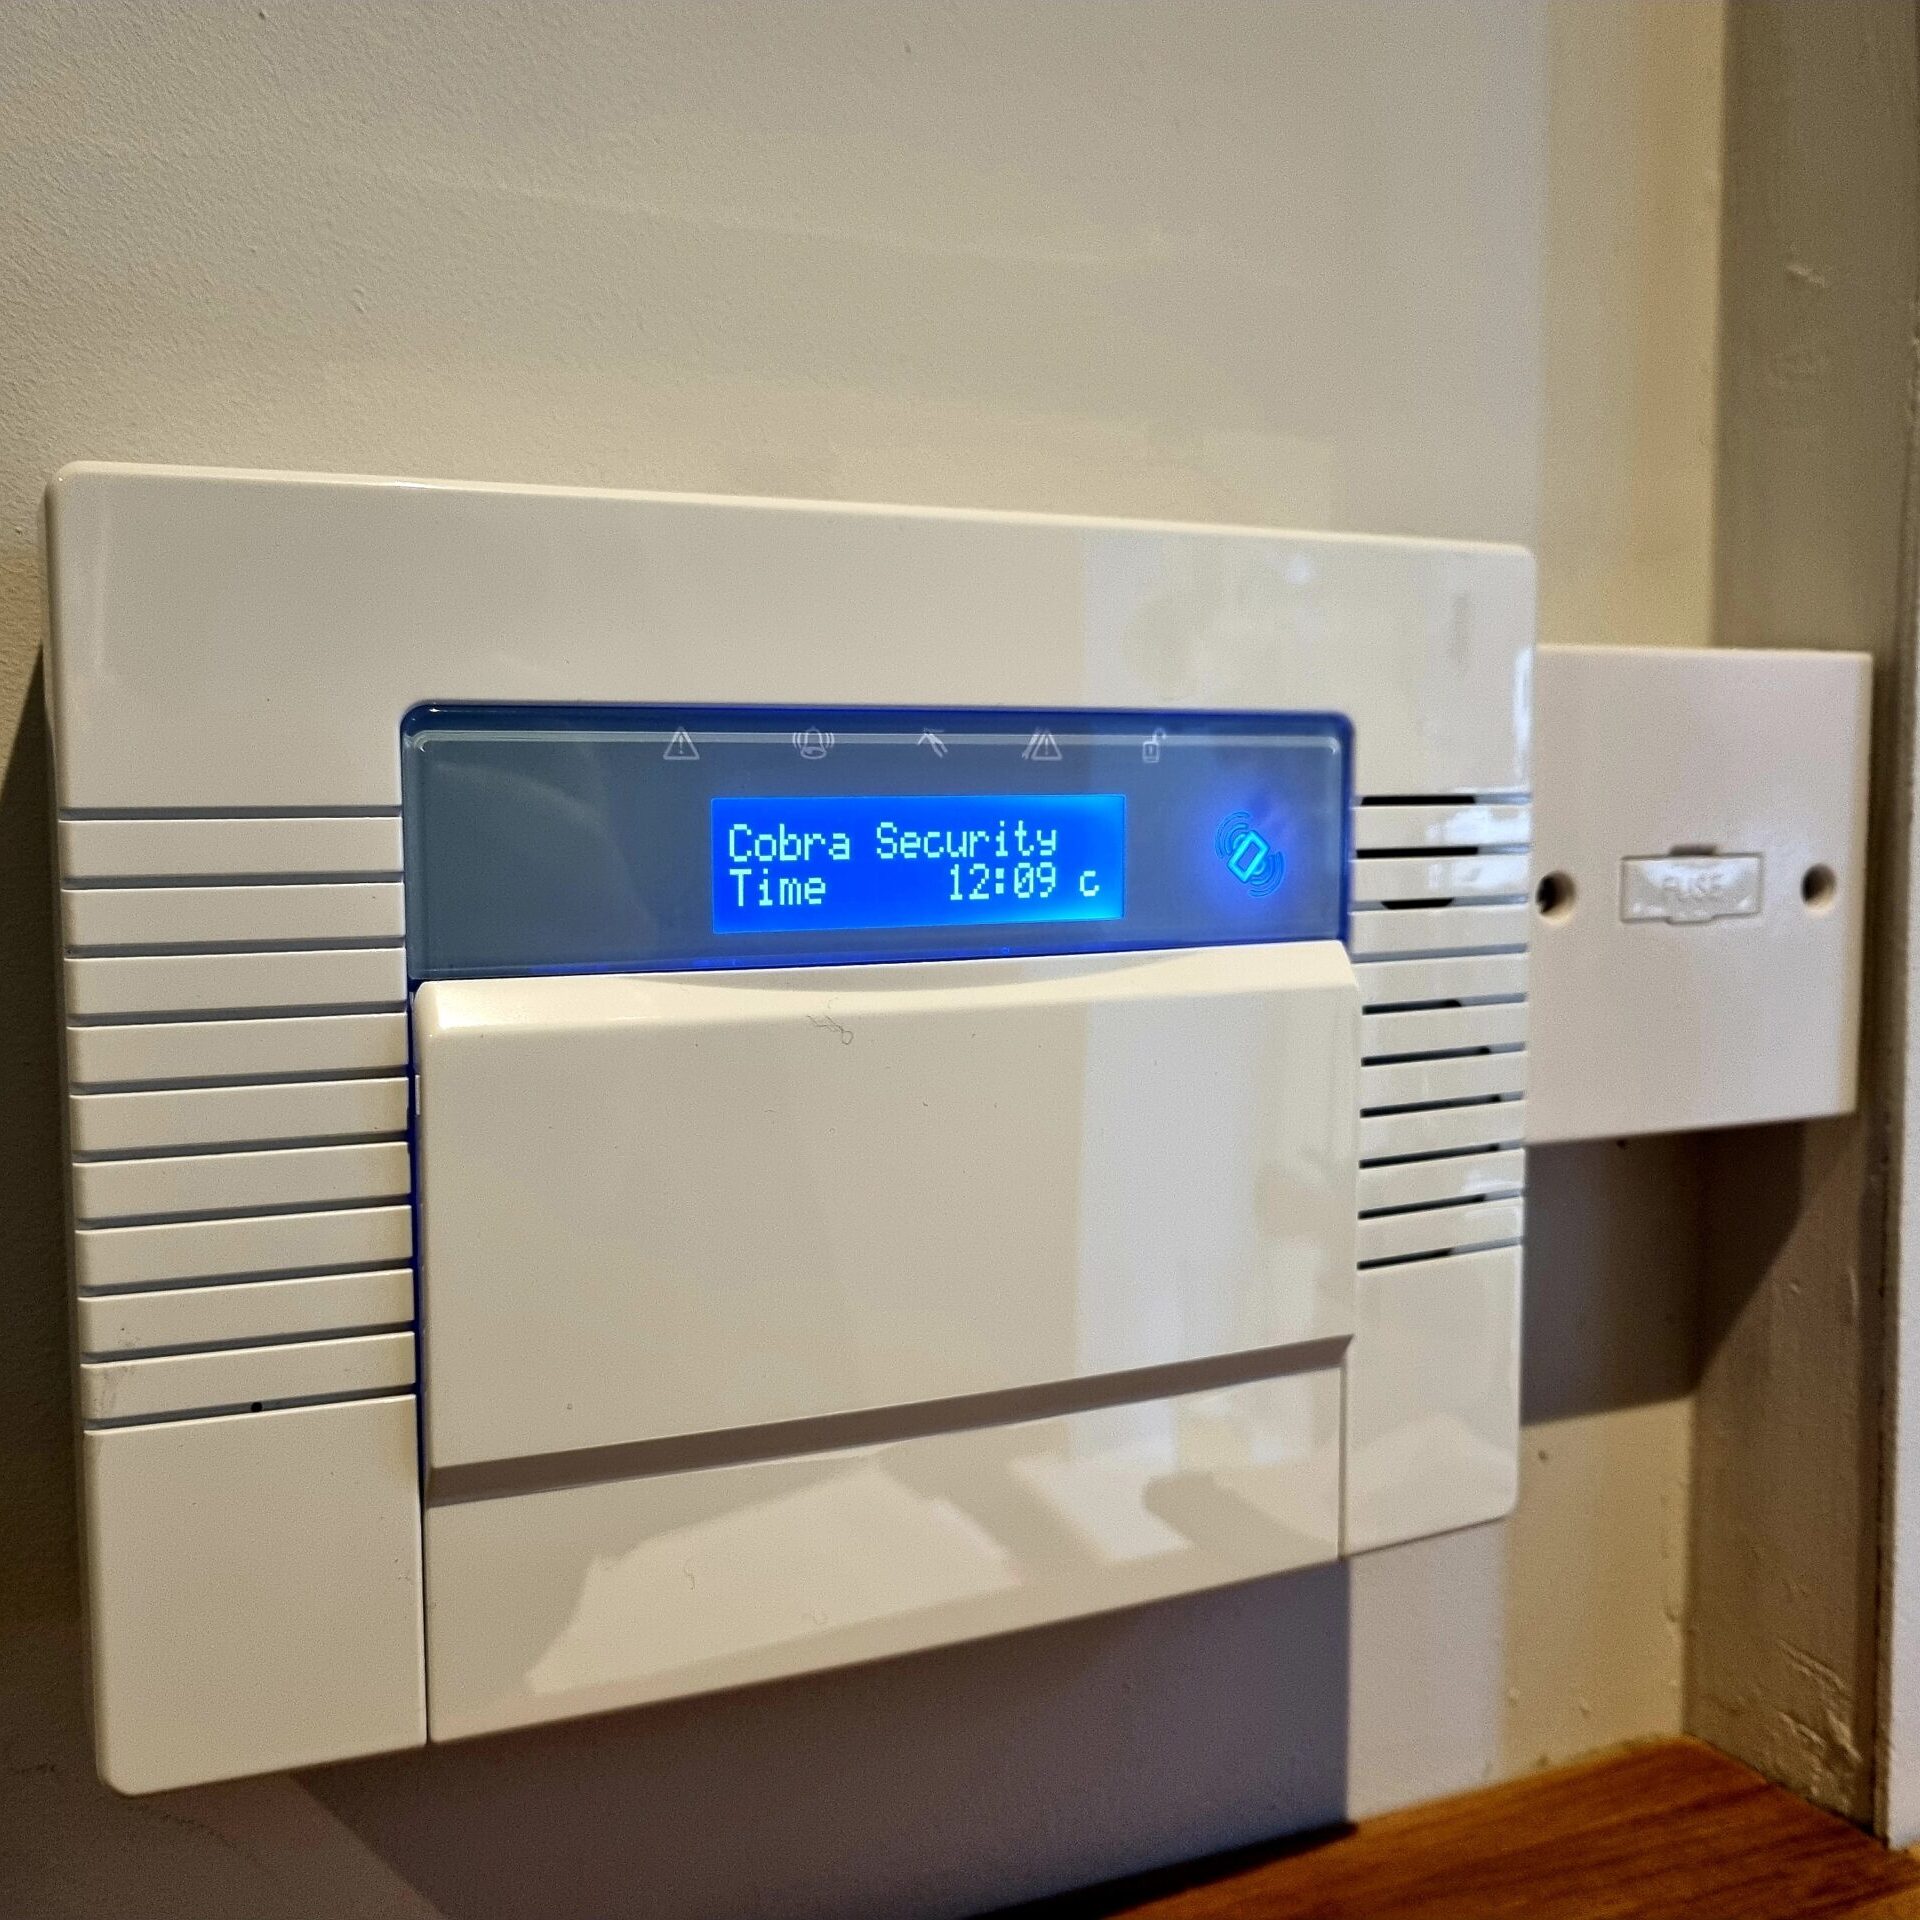 a wireless intruder alarm control panel with a blue display